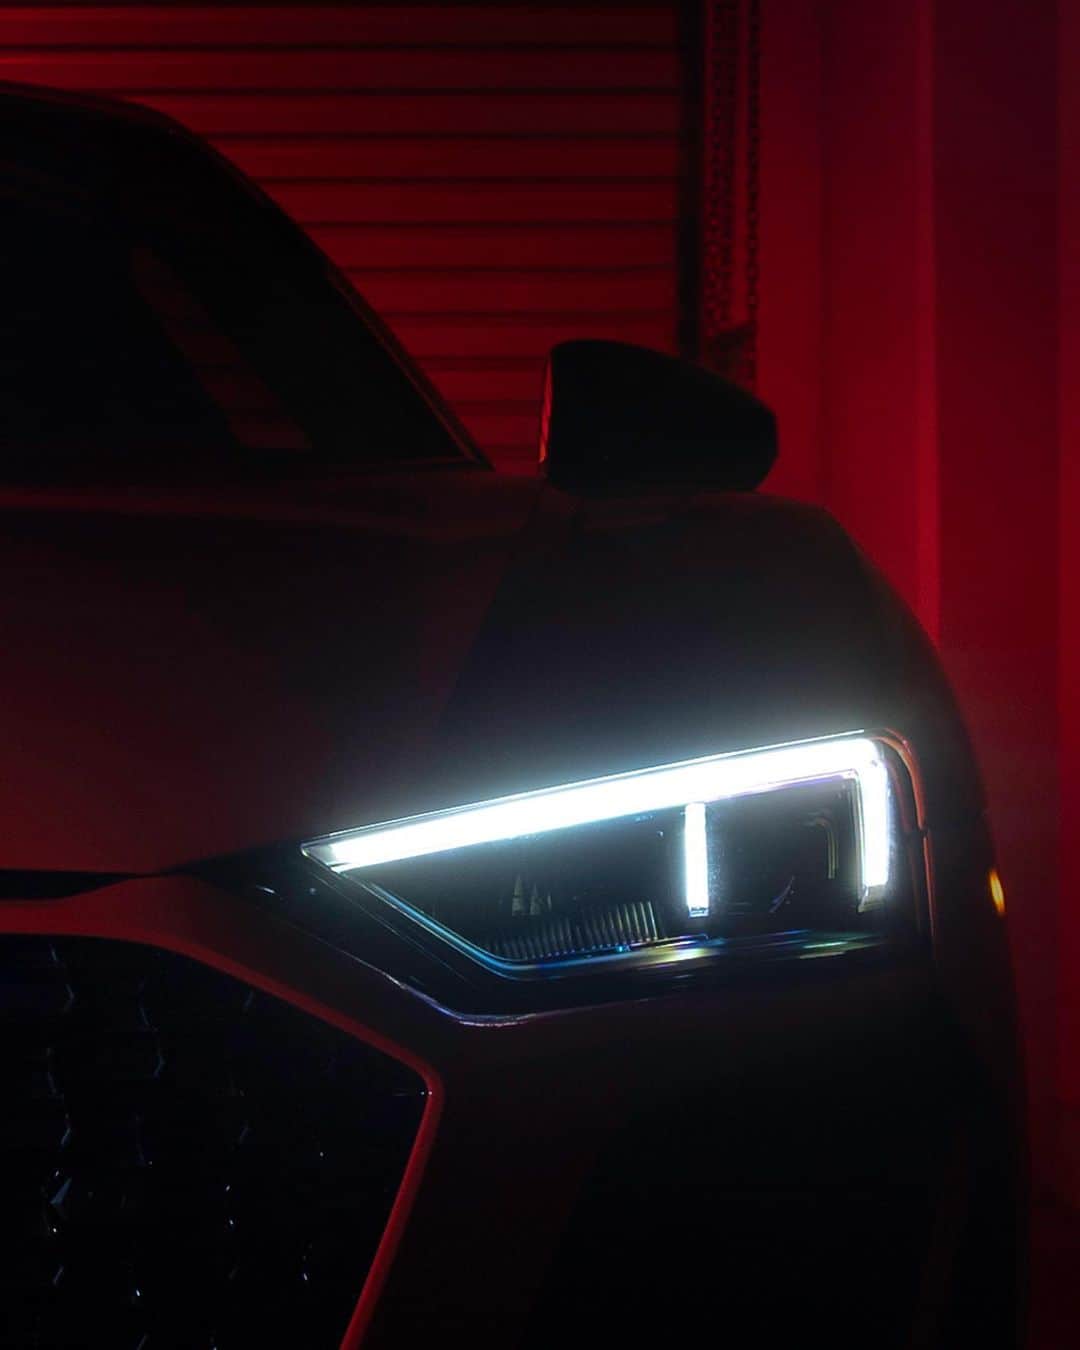 Audiのインスタグラム：「It’s the R8’s Last Lap. To celebrate its storied history, we have something special planned. Keep your eye on our posts. Stay tuned for details on 9/12 at 9am EST  #Audi #AudiR8 #AudiR8LastLap.」